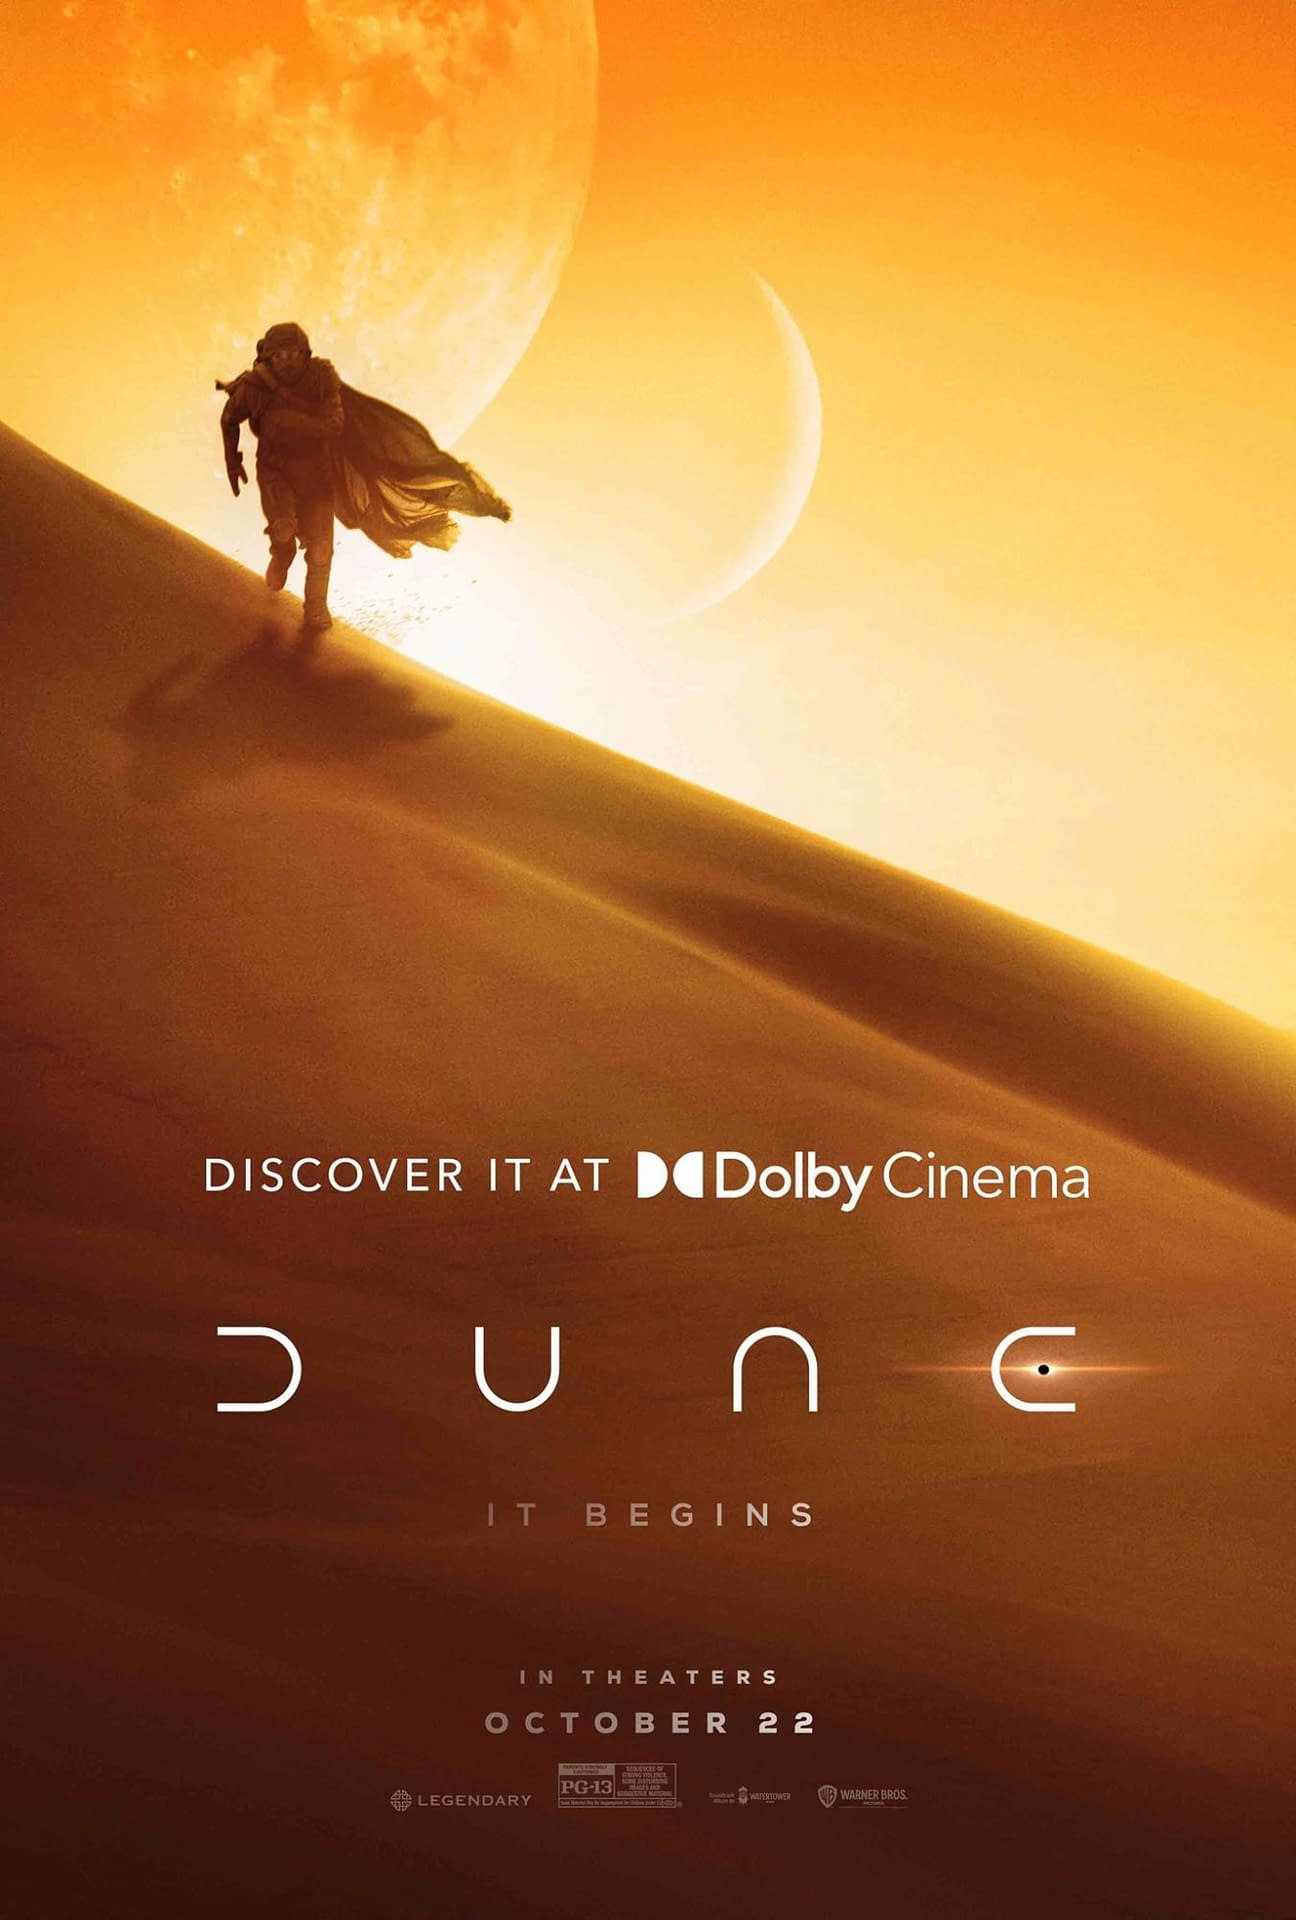 Dolby Cinema Releases a New Dune Poster as the Festival Buzz Grows